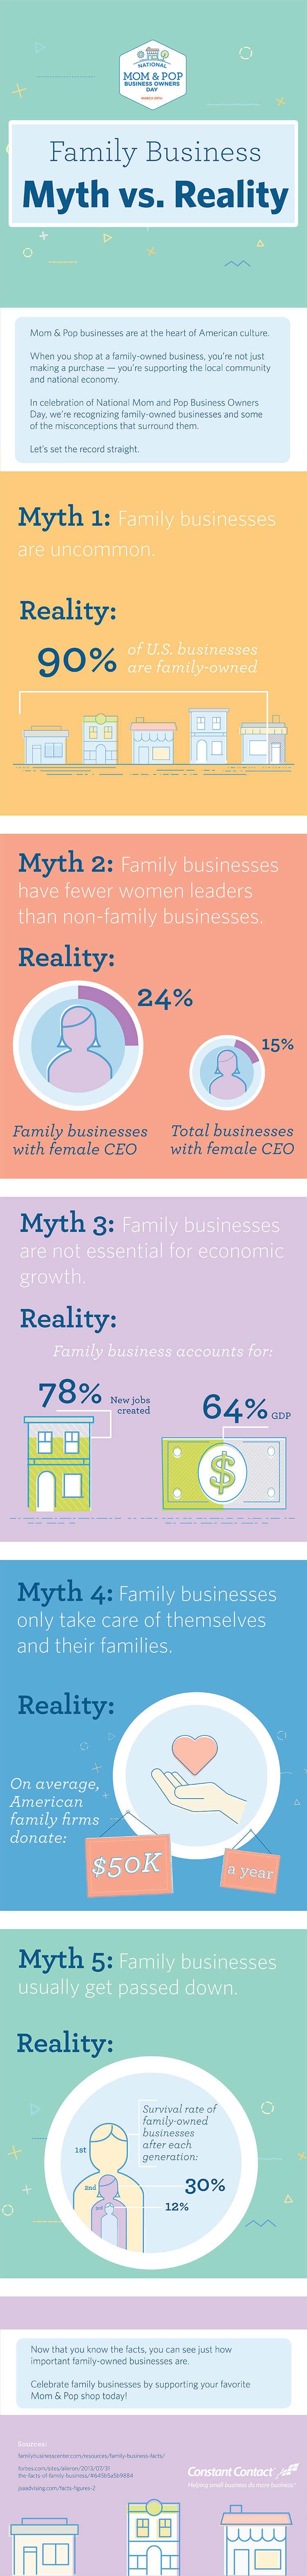 family business myth versus reality [infographic]